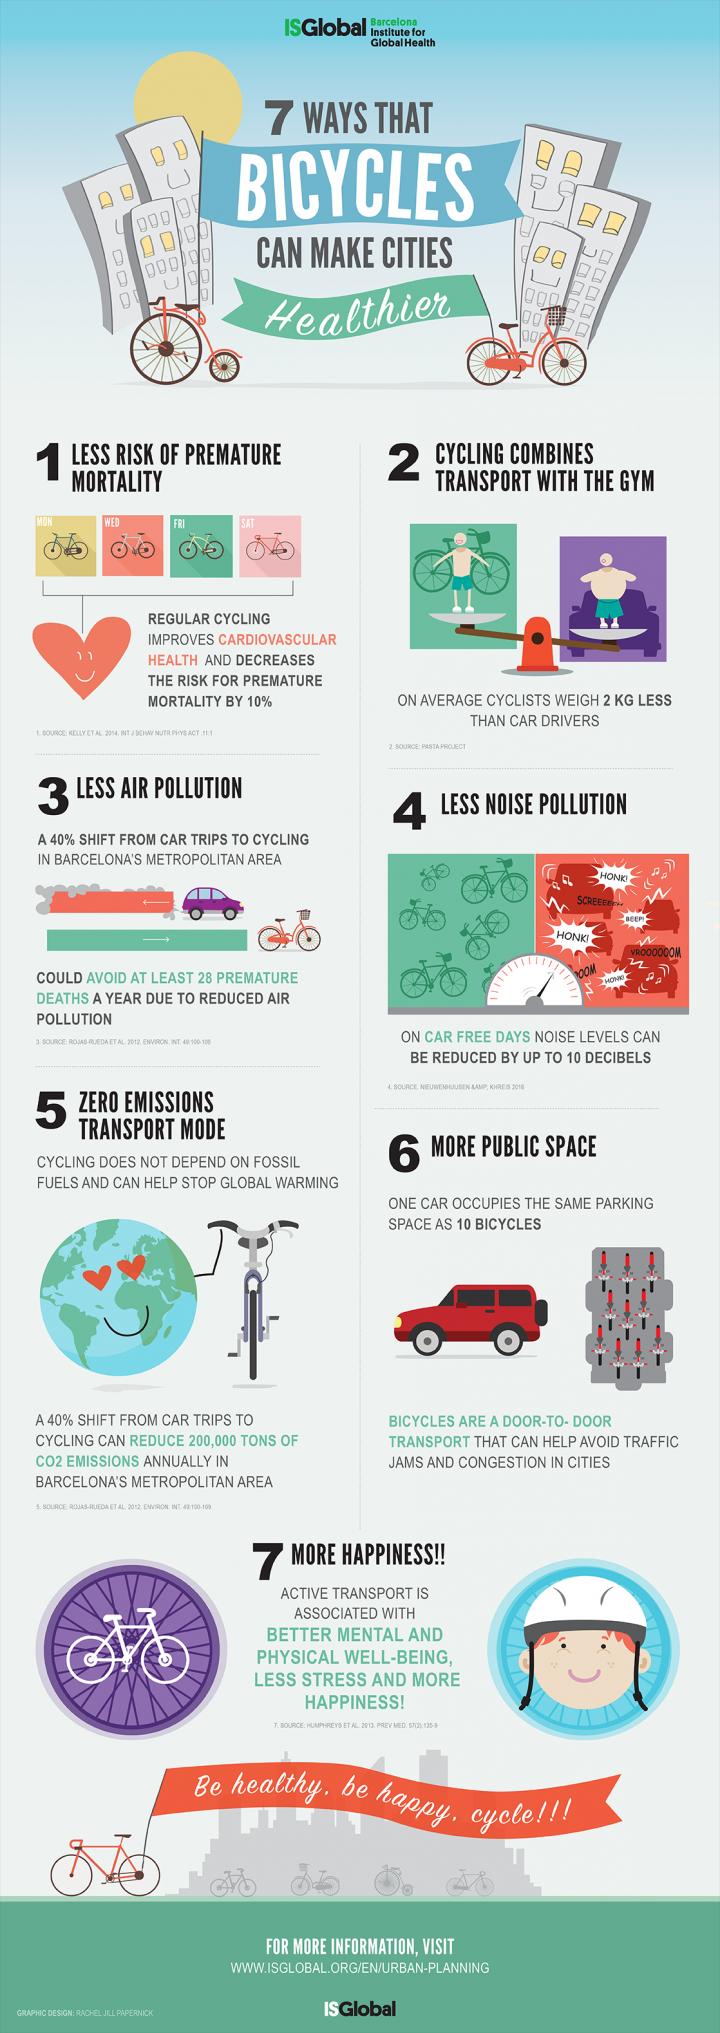 7 Ways that Bicycles Can Make Cities Healthier